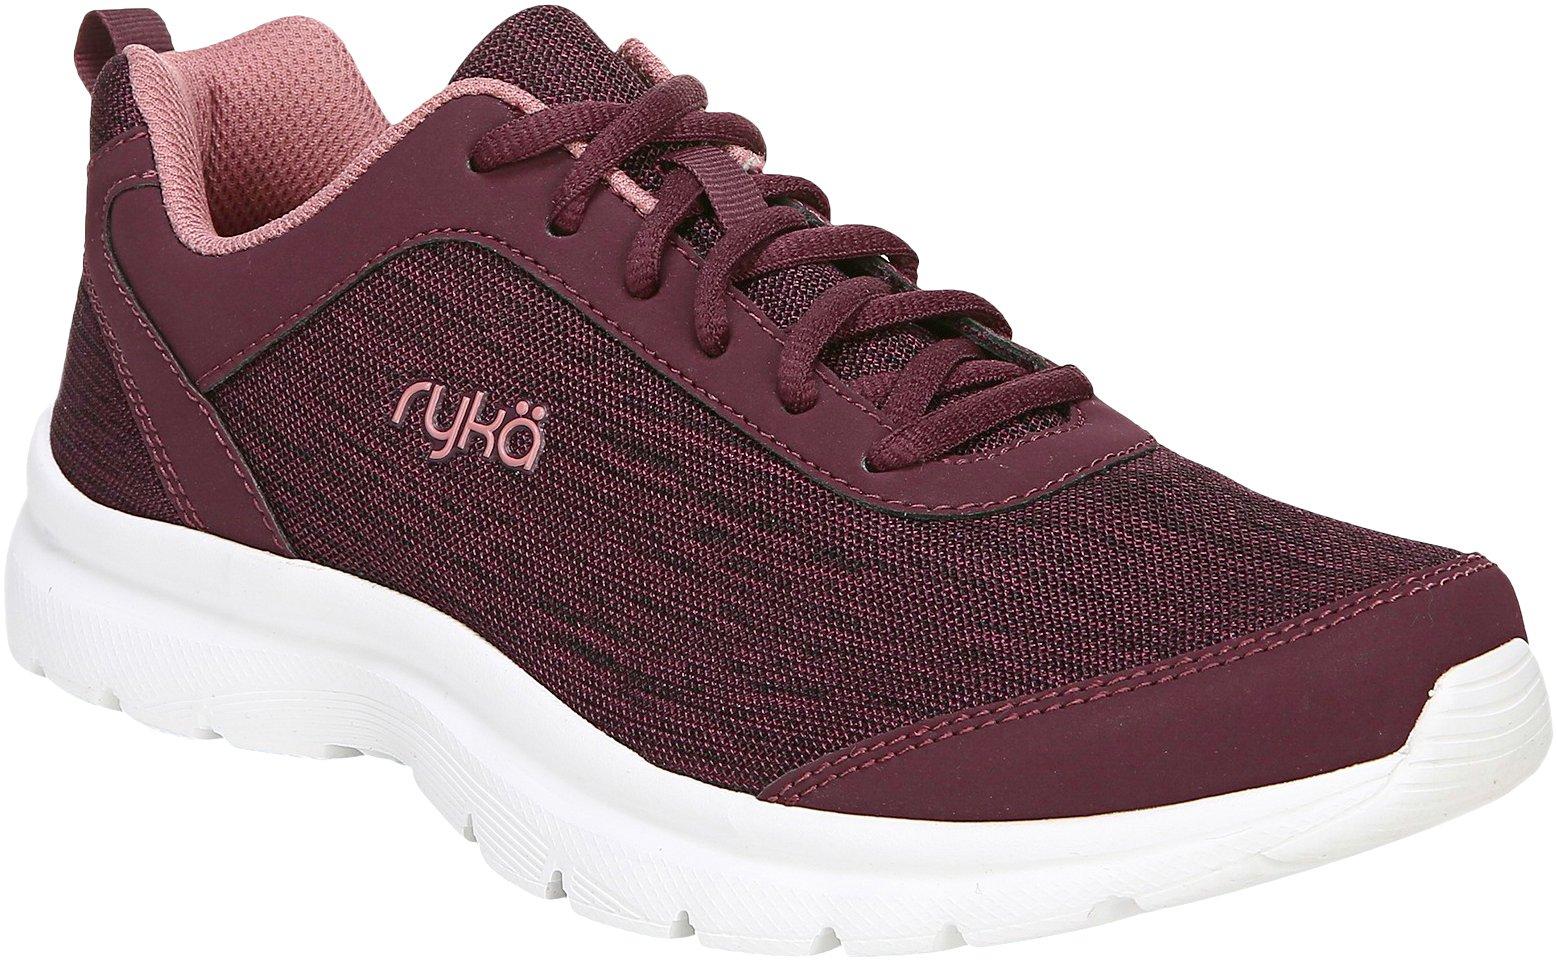 ryka athletic shoes